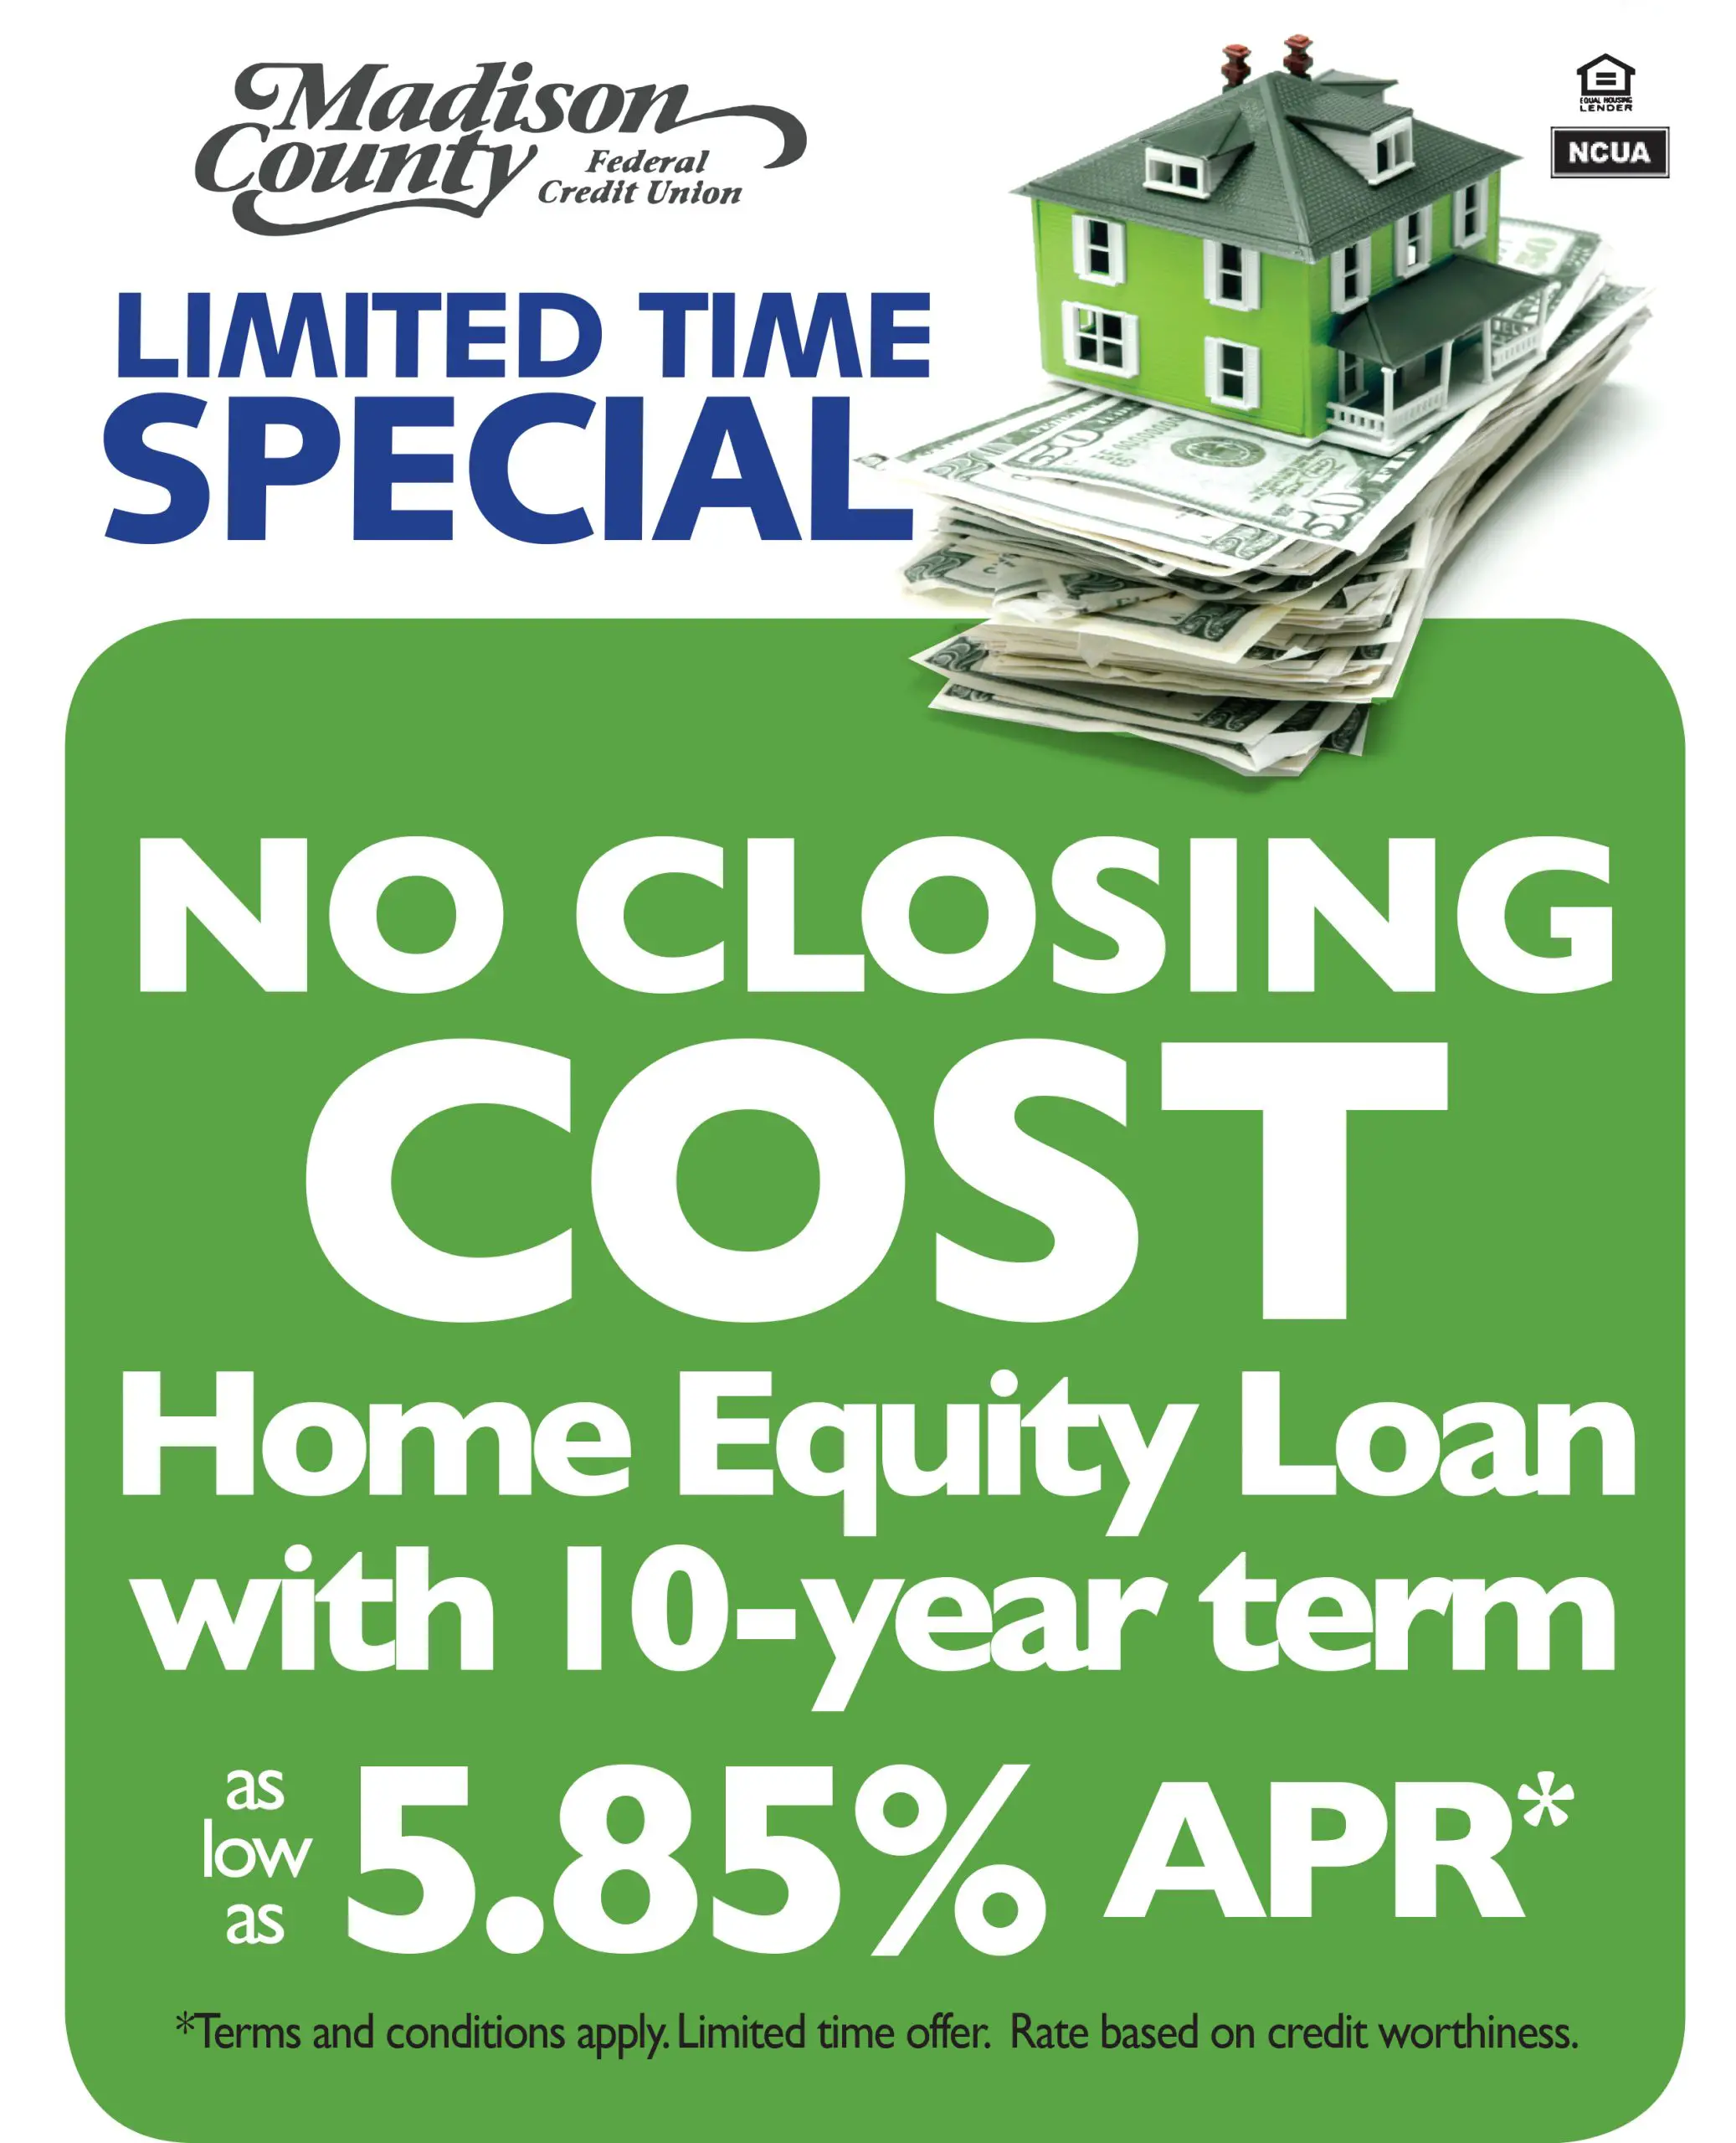 How Much Does A Home Equity Loan Cost